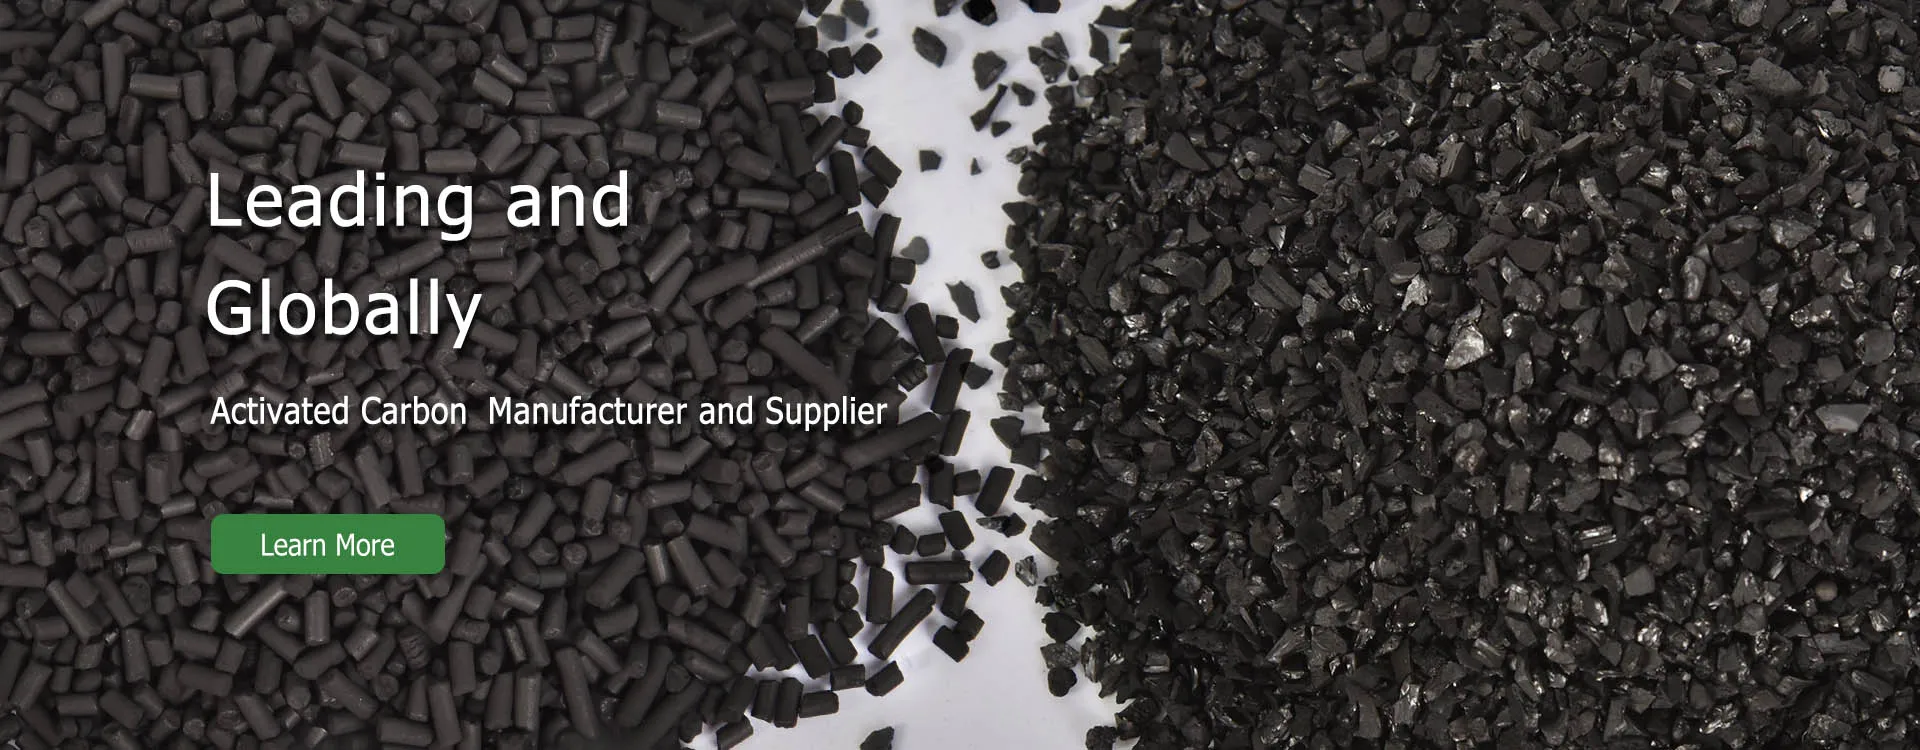 Activated carbon manufacturers